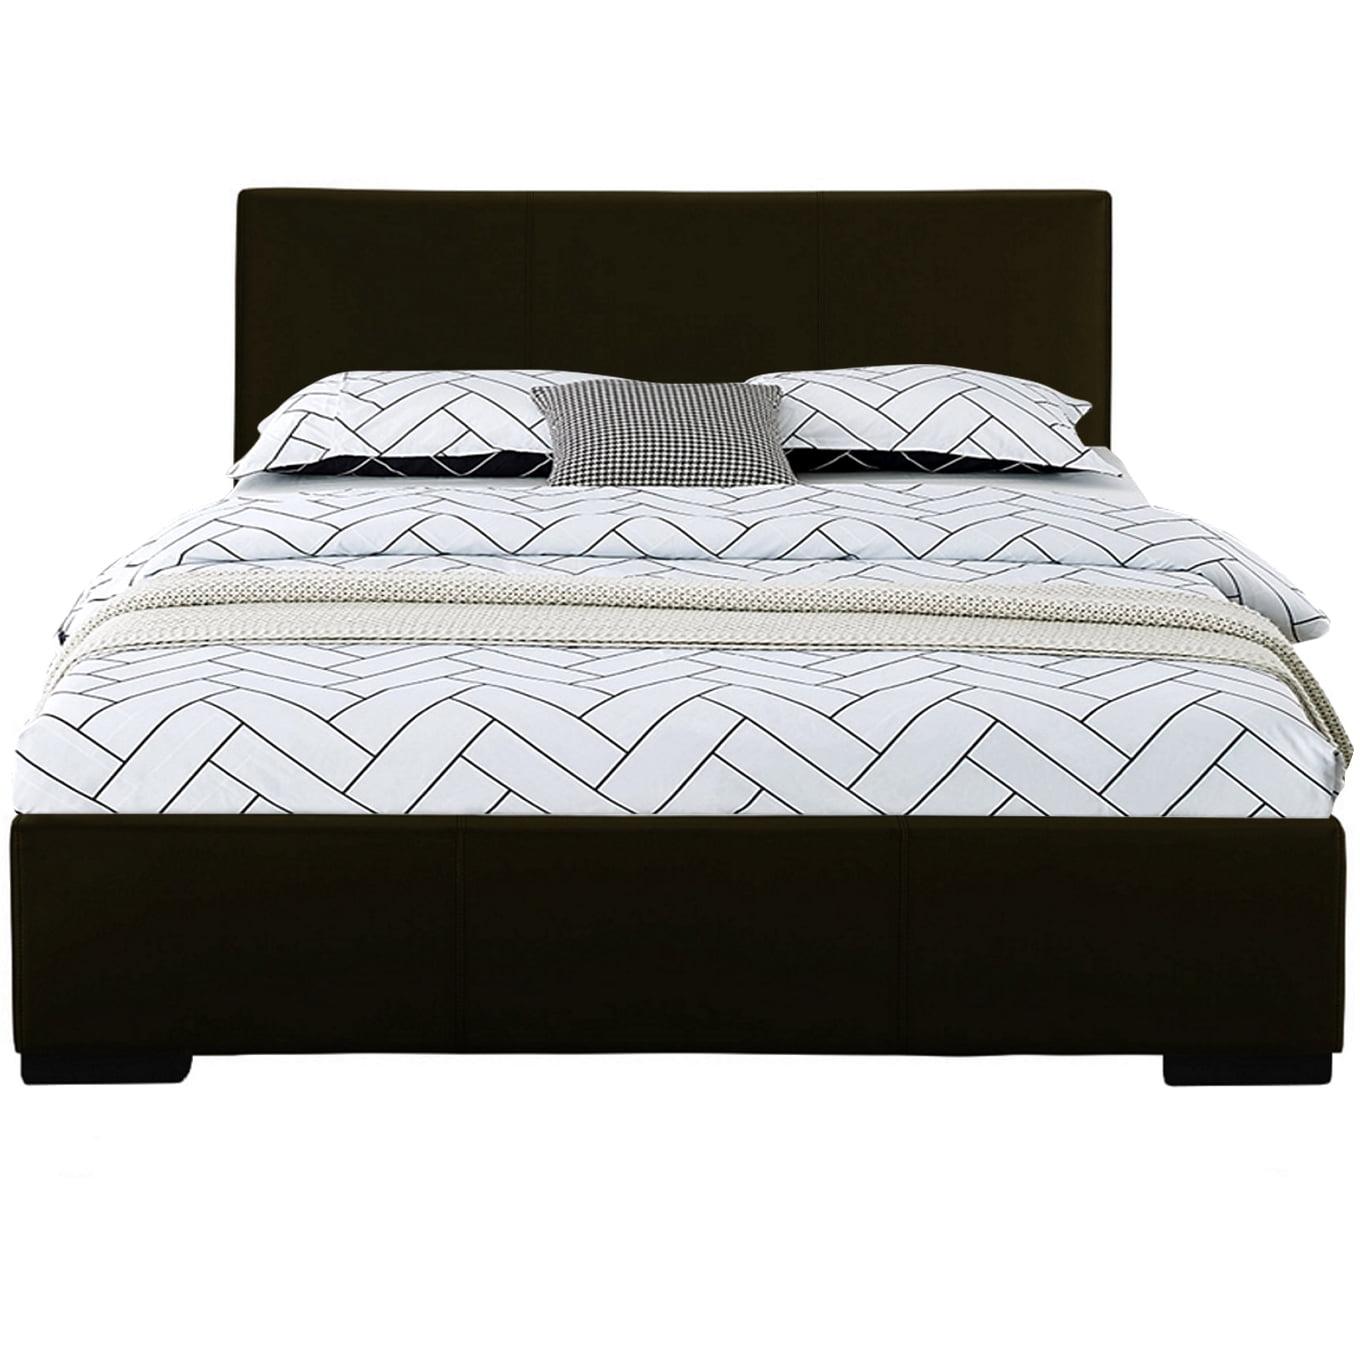 Abbey Queen Black Faux Leather Upholstered Platform Bed with Slats